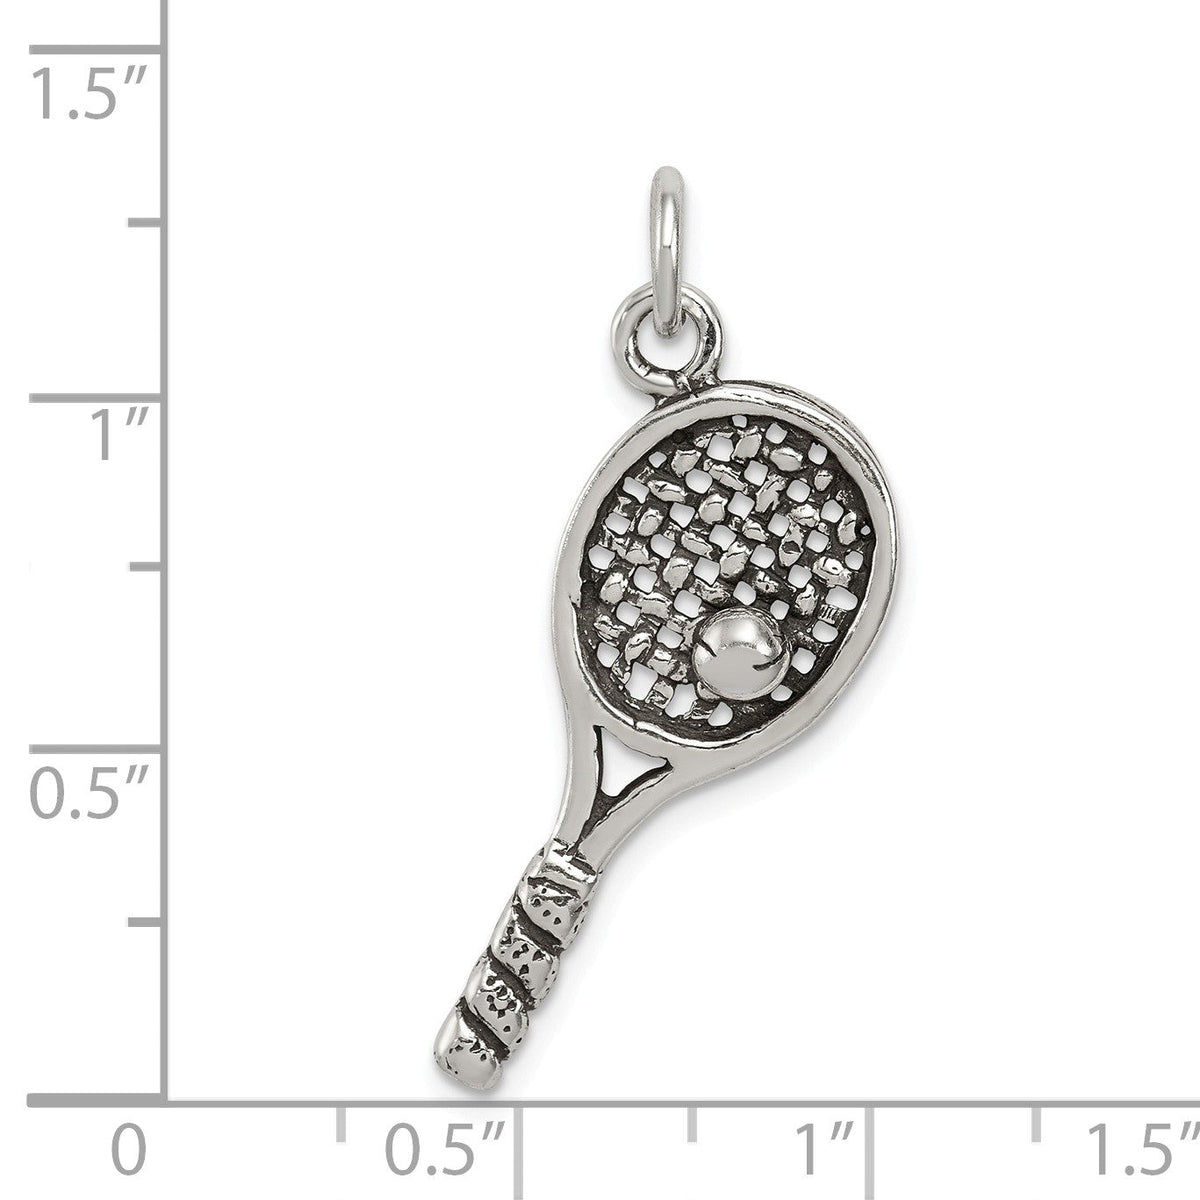 Alternate view of the Sterling Silver Antiqued Tennis Racquet and Ball Pendant by The Black Bow Jewelry Co.